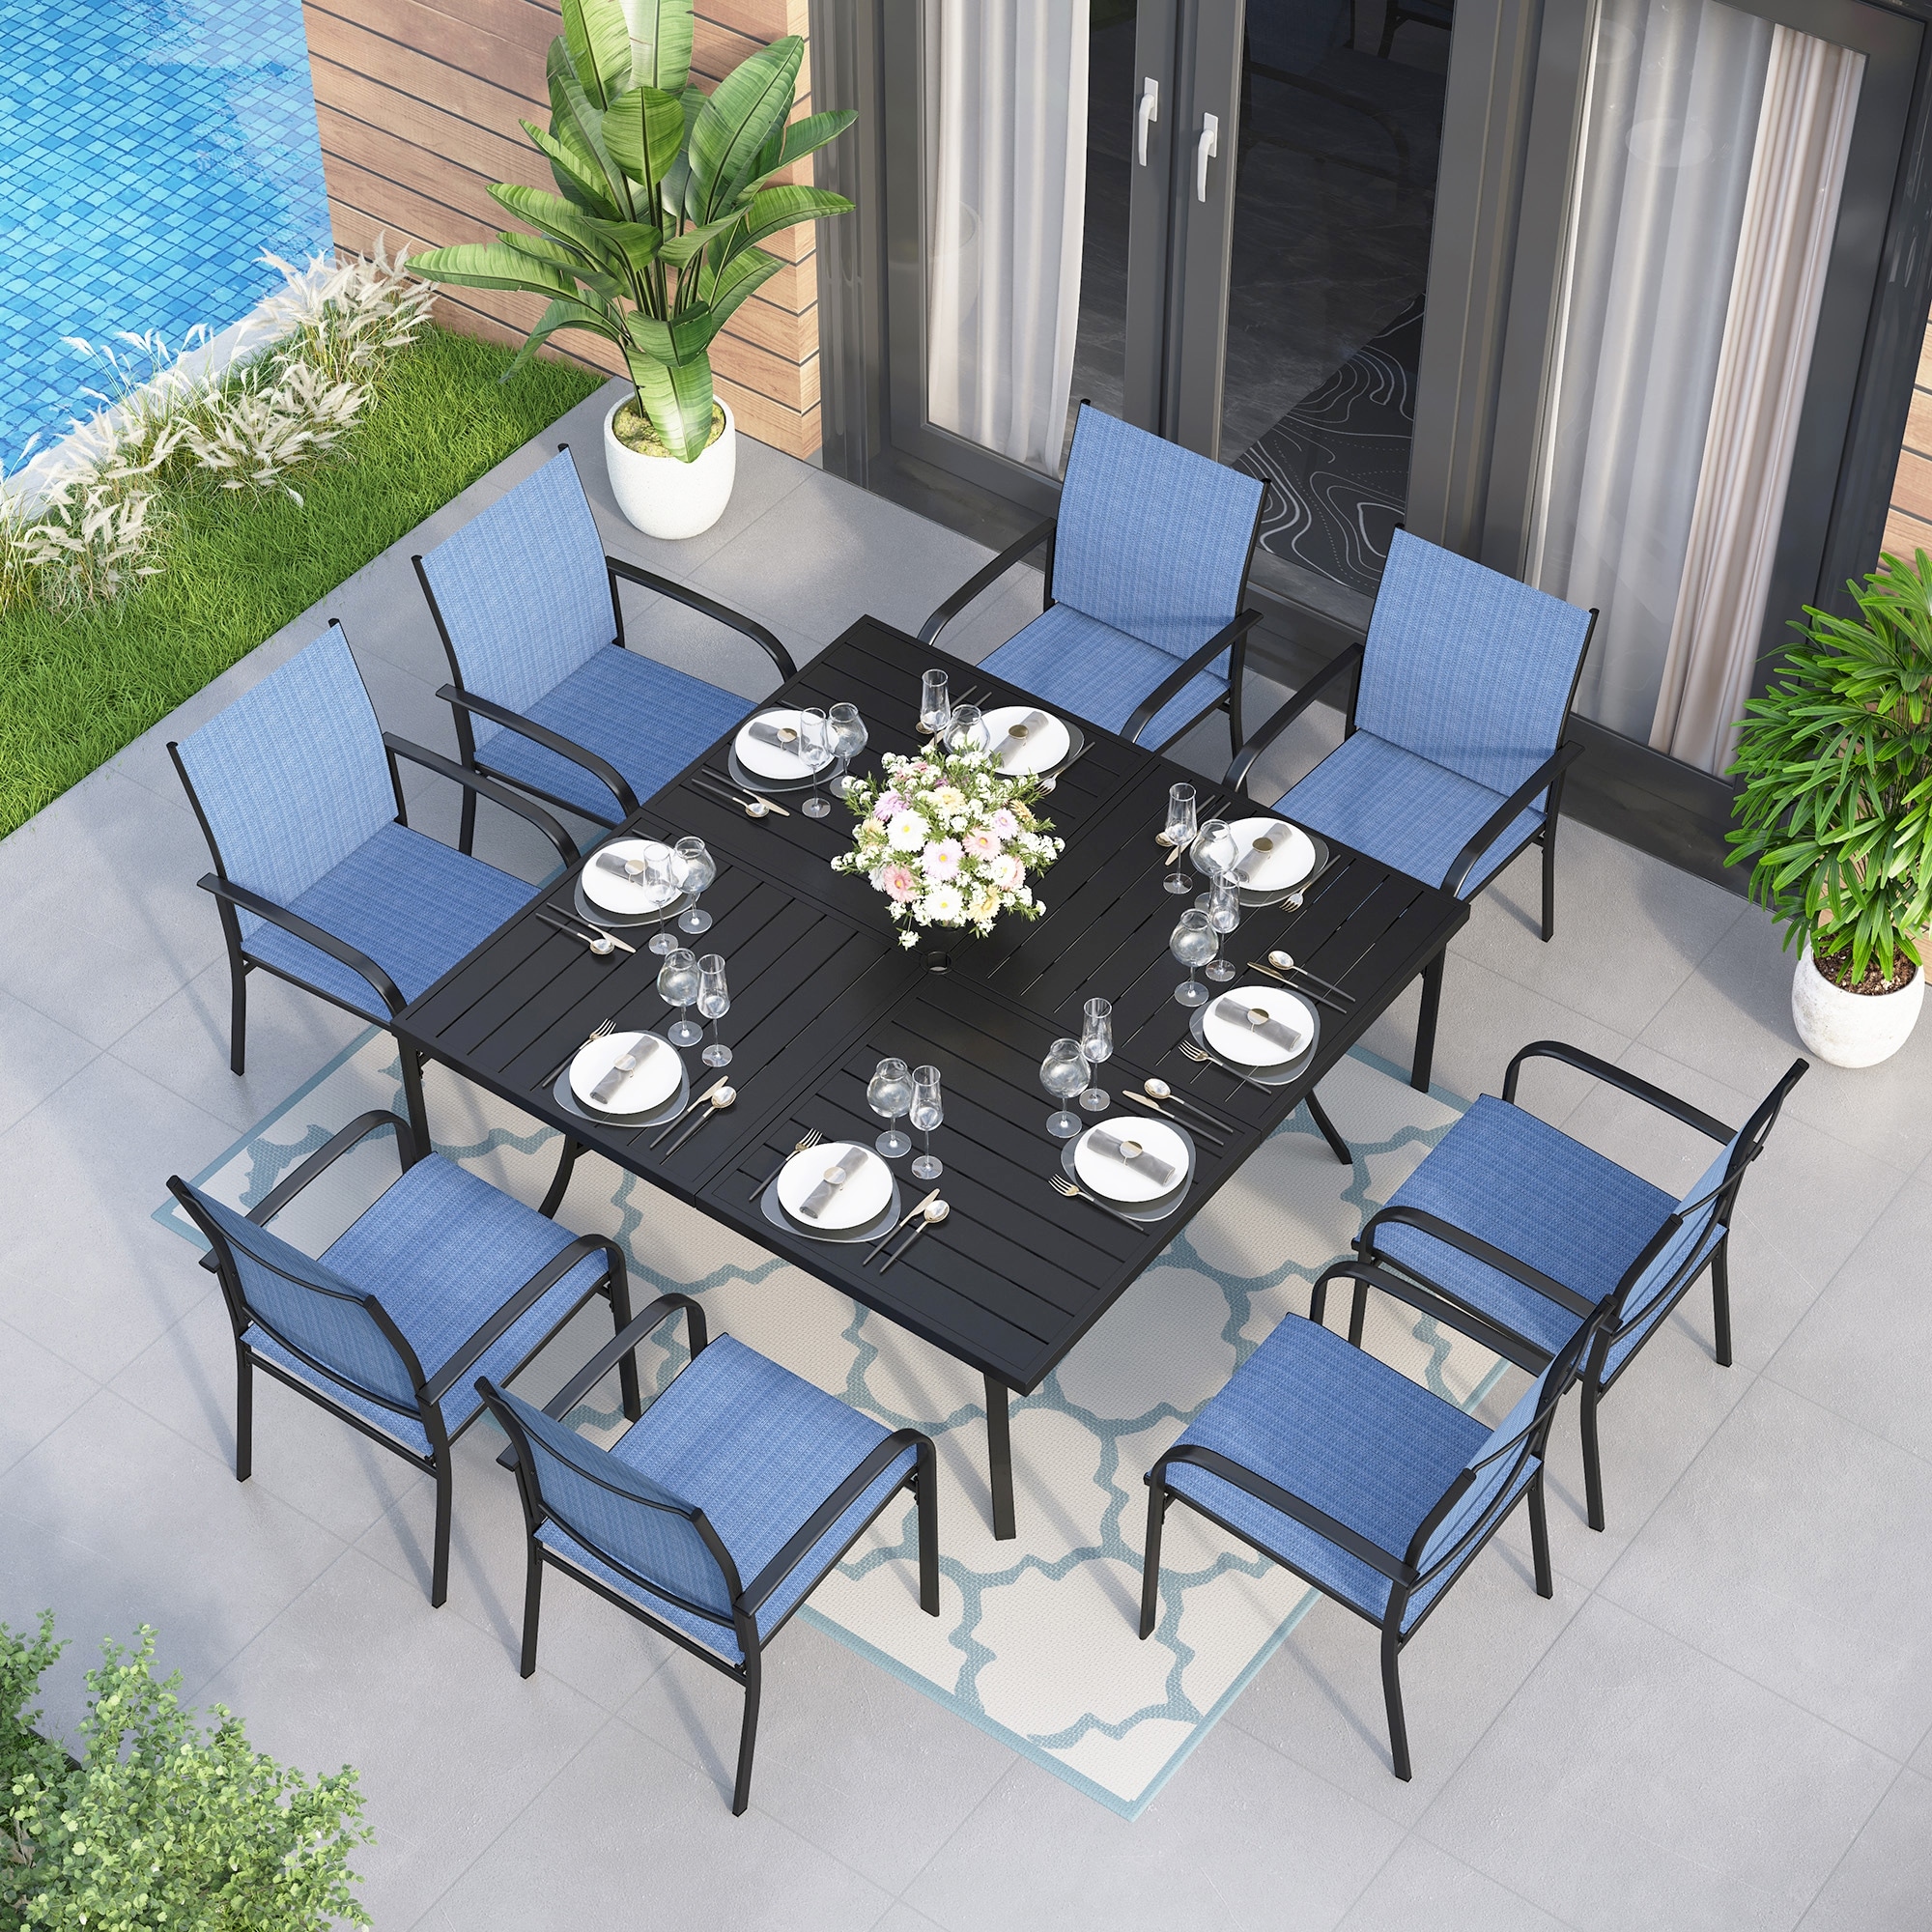 Outdoor Dining Sets - Bed Bath & Beyond